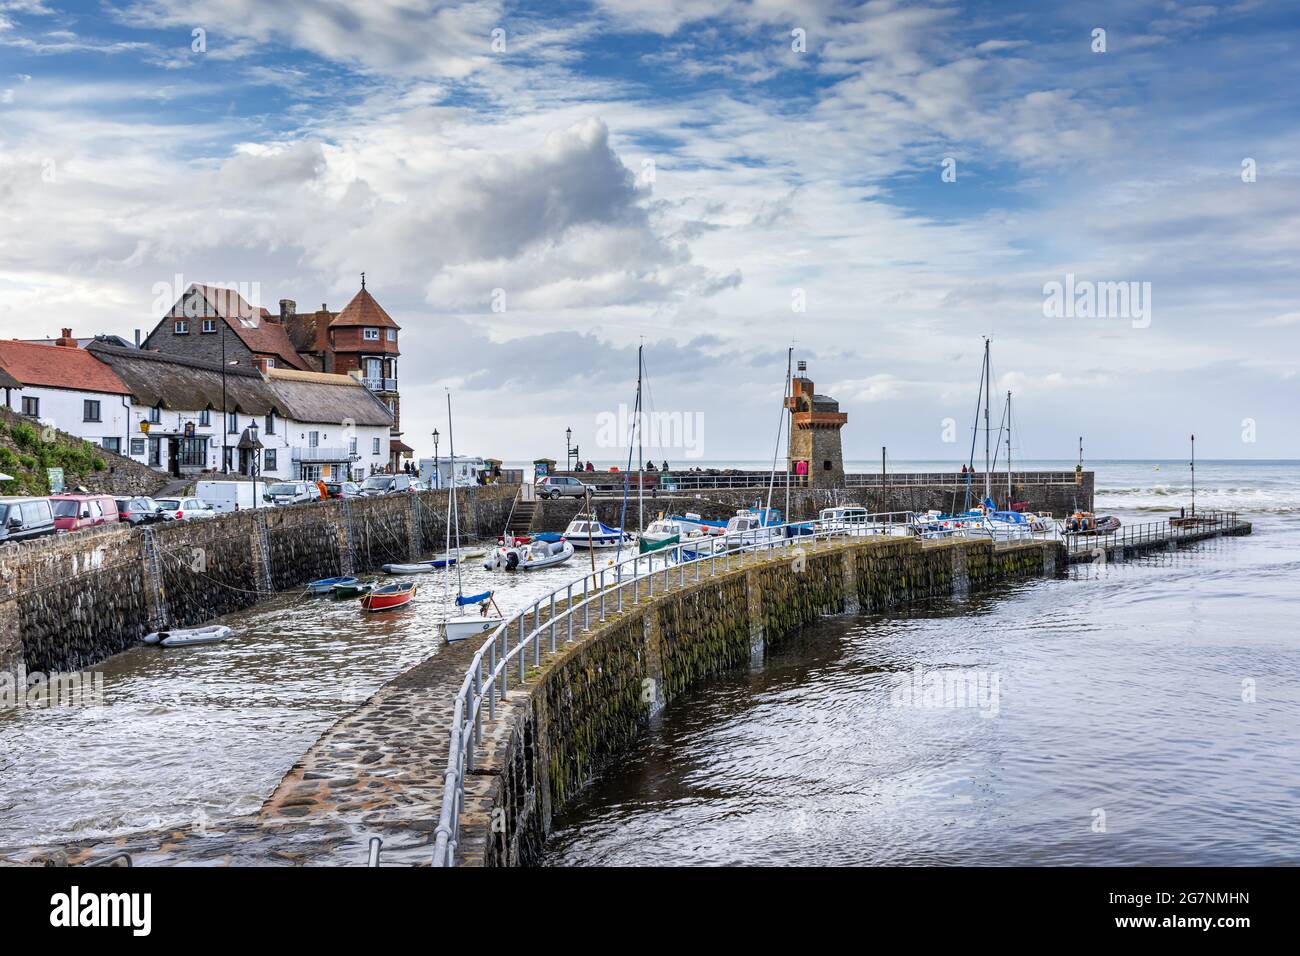 Lynmouth harbour at high tide with the Rhenish Tower on the harbour wall, North Devon, England. Stock Photo